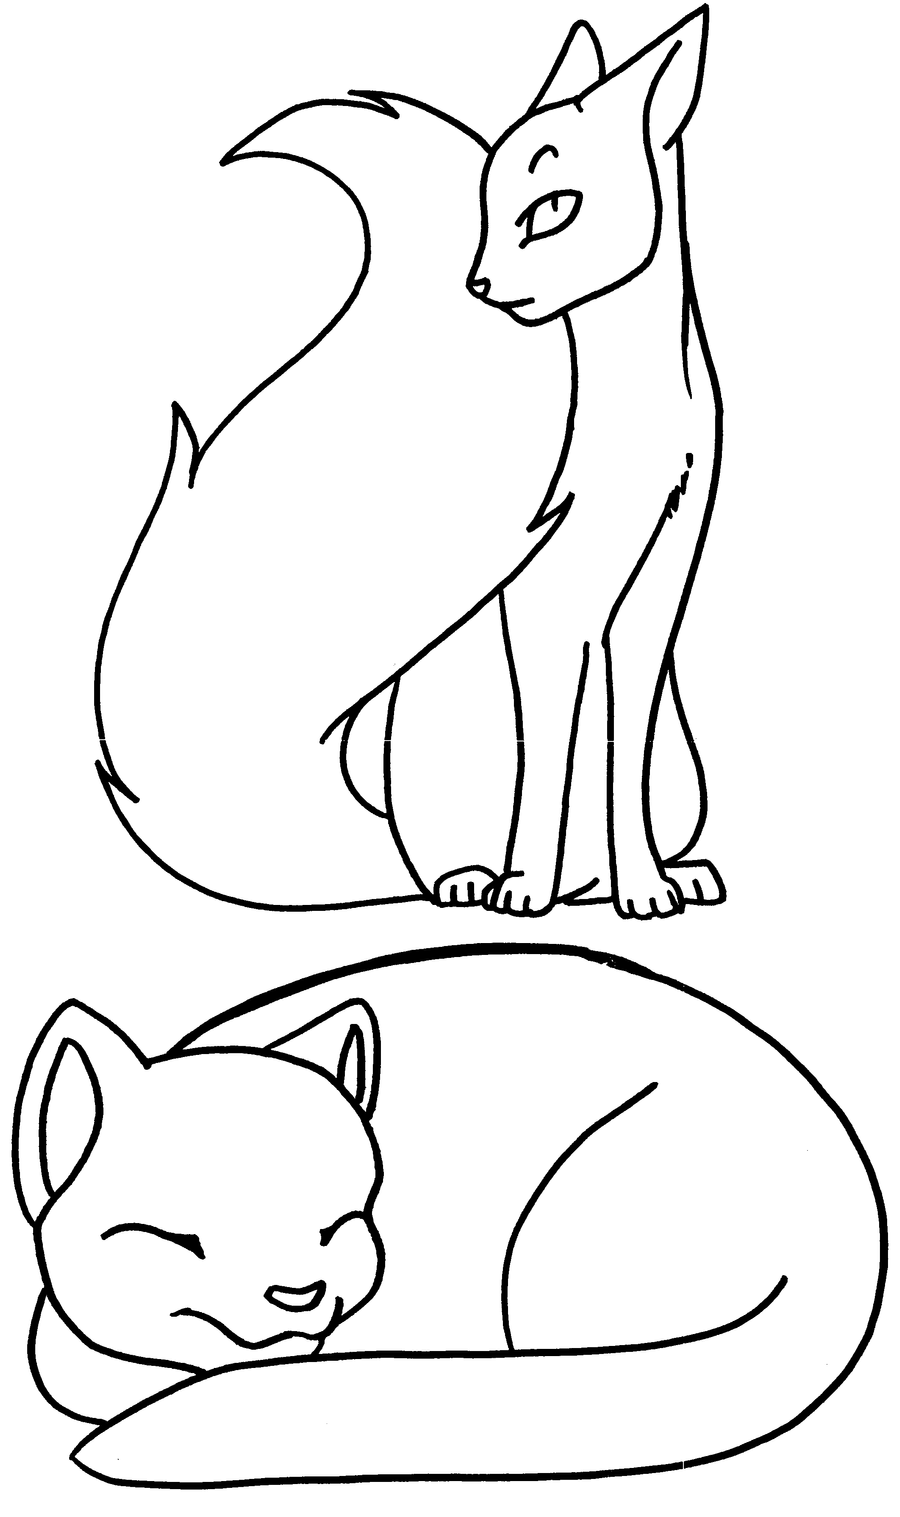 cat color page coloring pages for kids cat coloring pages for kids color cat page 